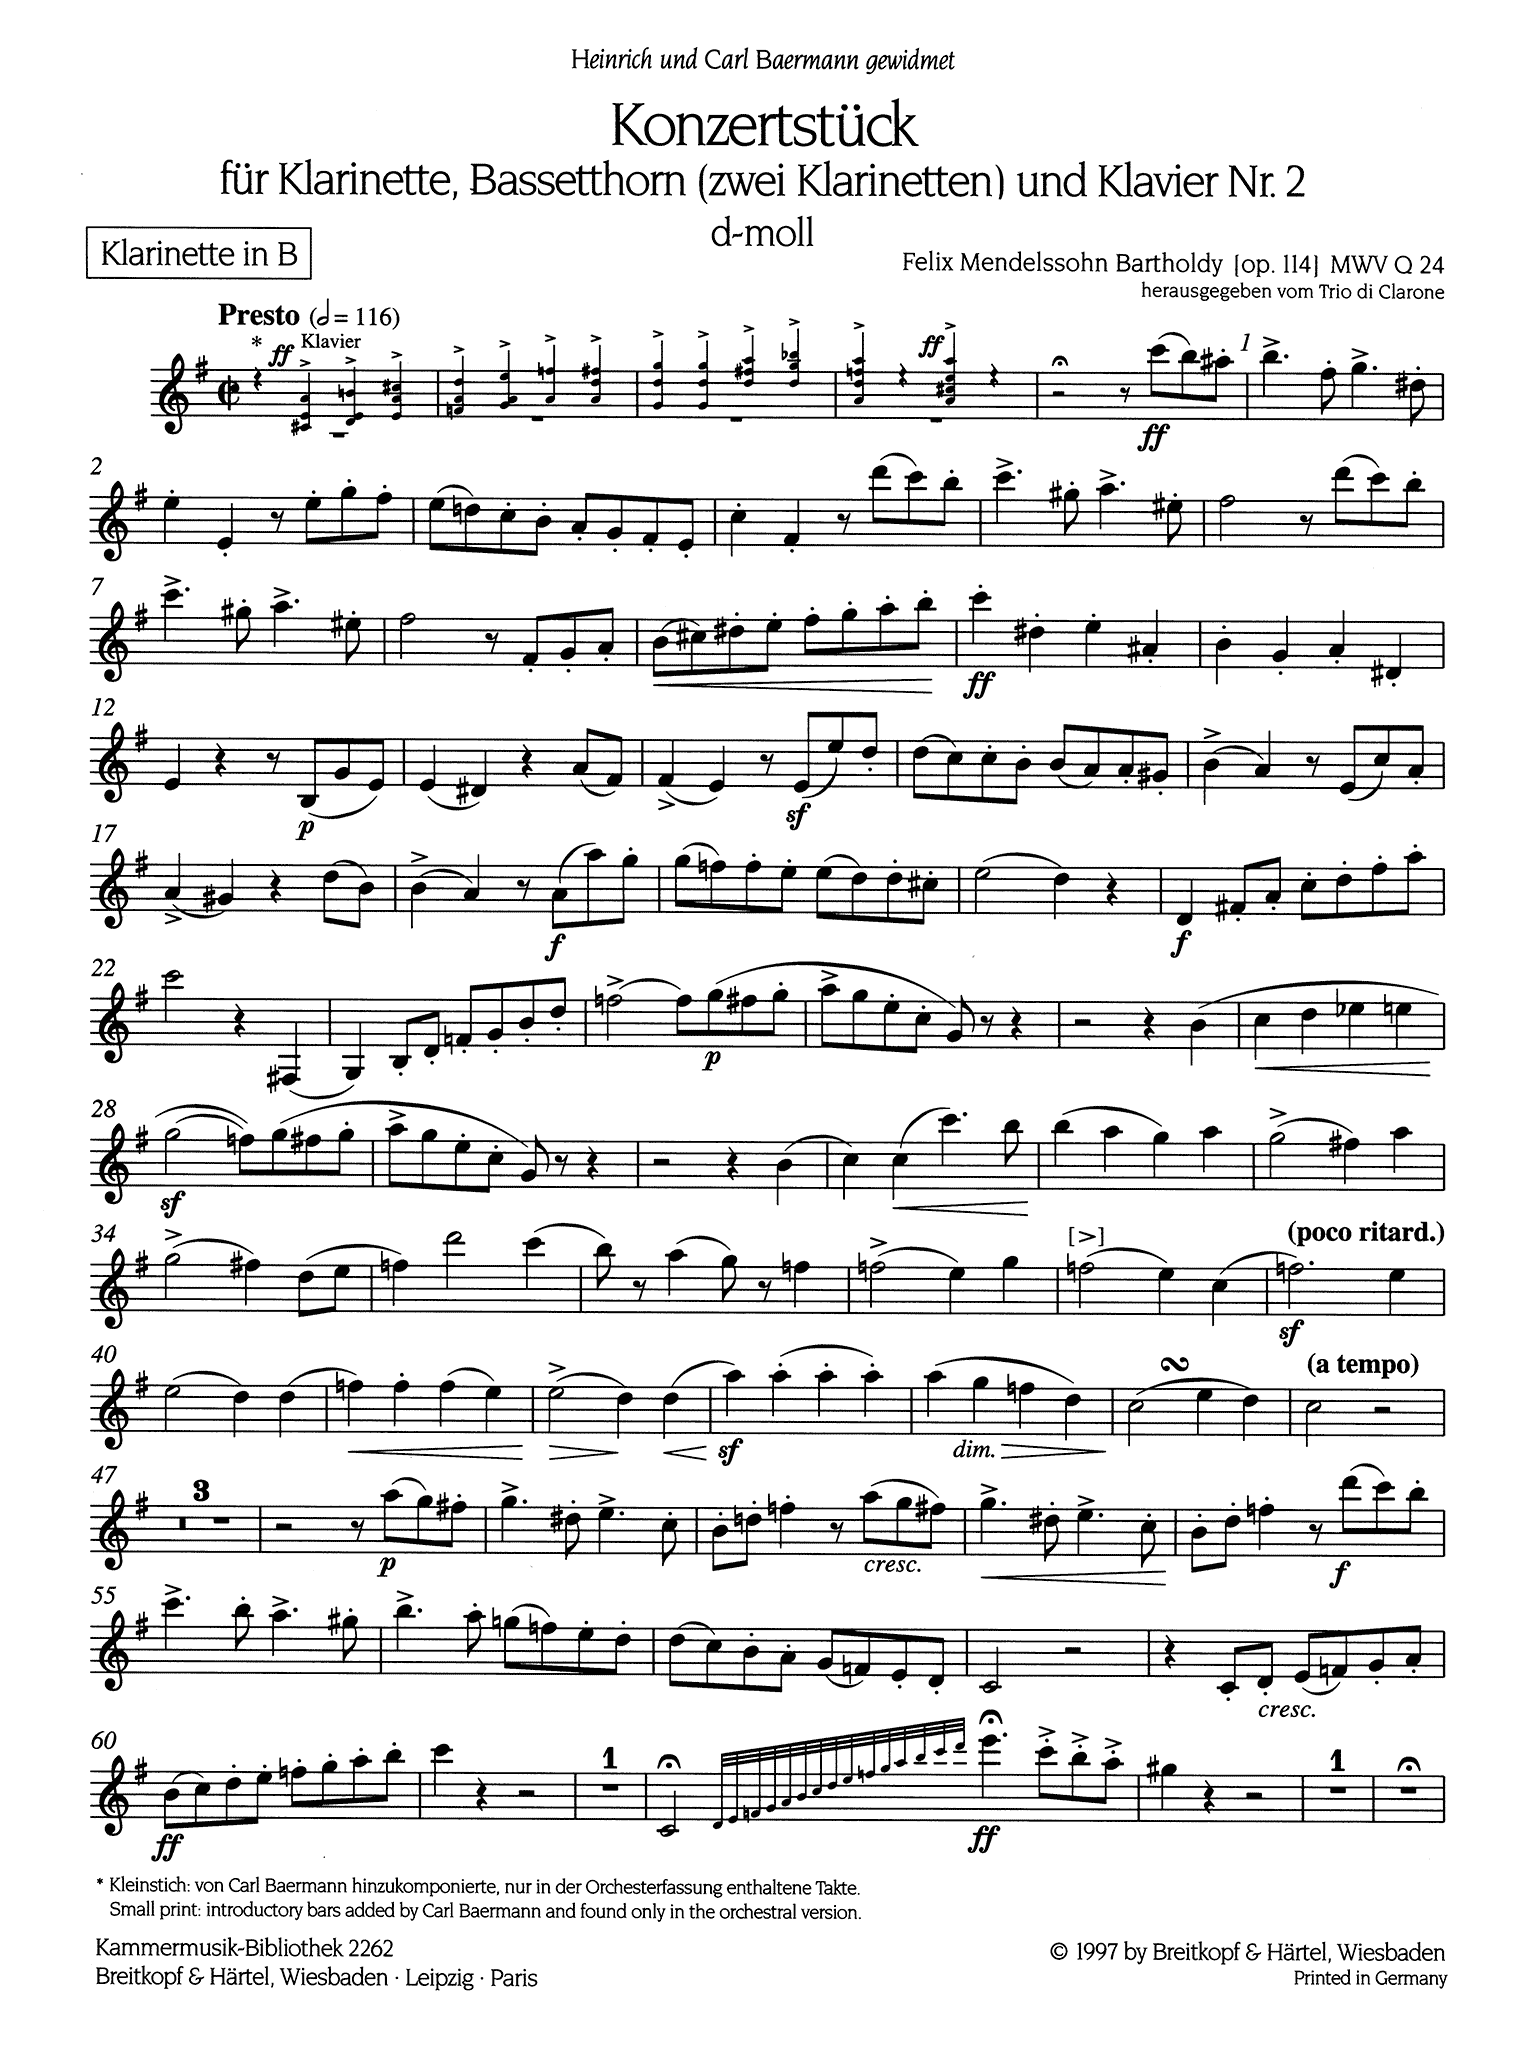 Concertpiece No. 2 in D Minor, Op. 114 First Clarinet solo part